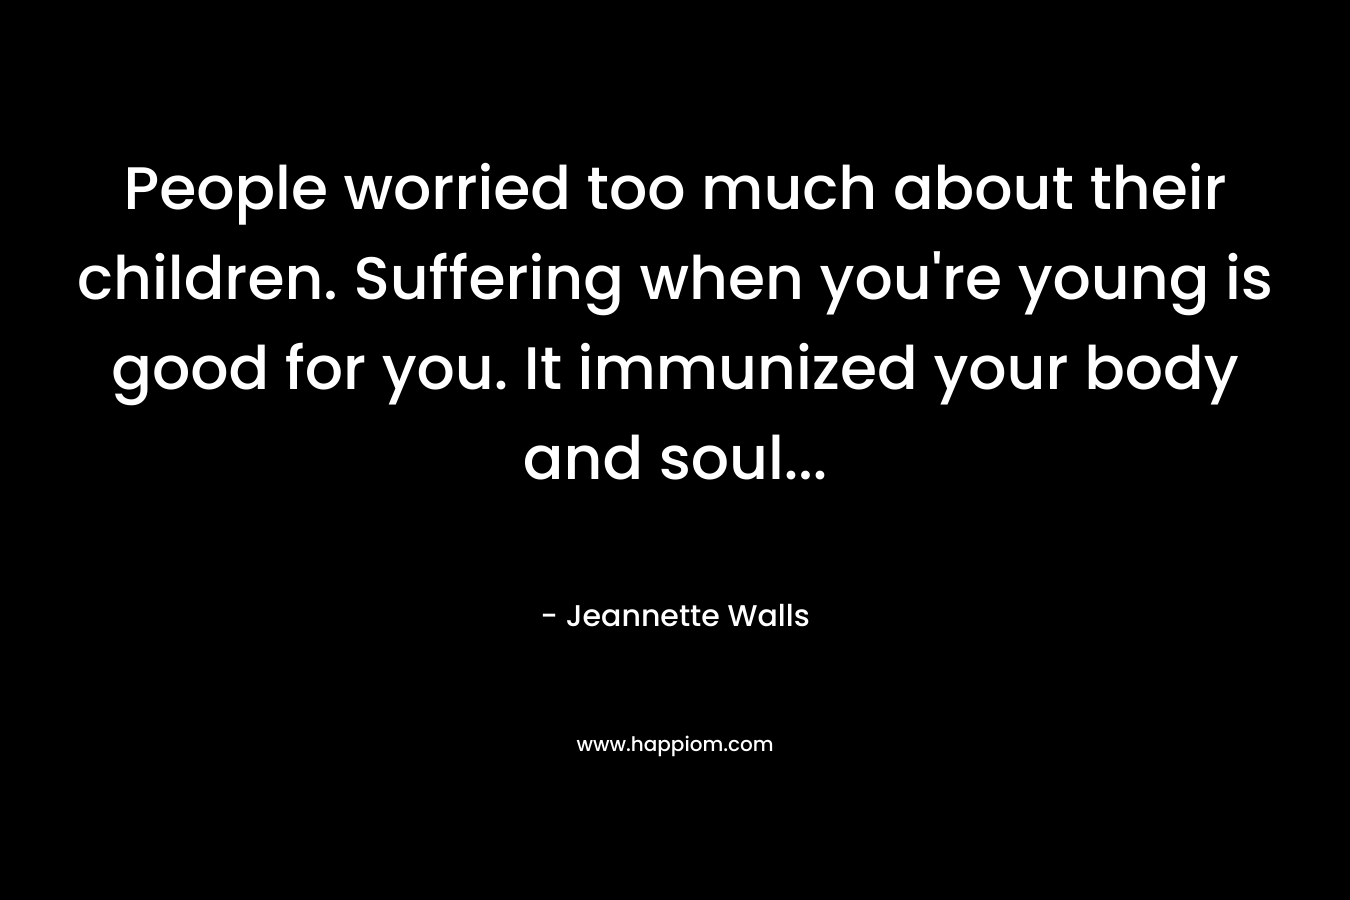 People worried too much about their children. Suffering when you're young is good for you. It immunized your body and soul...